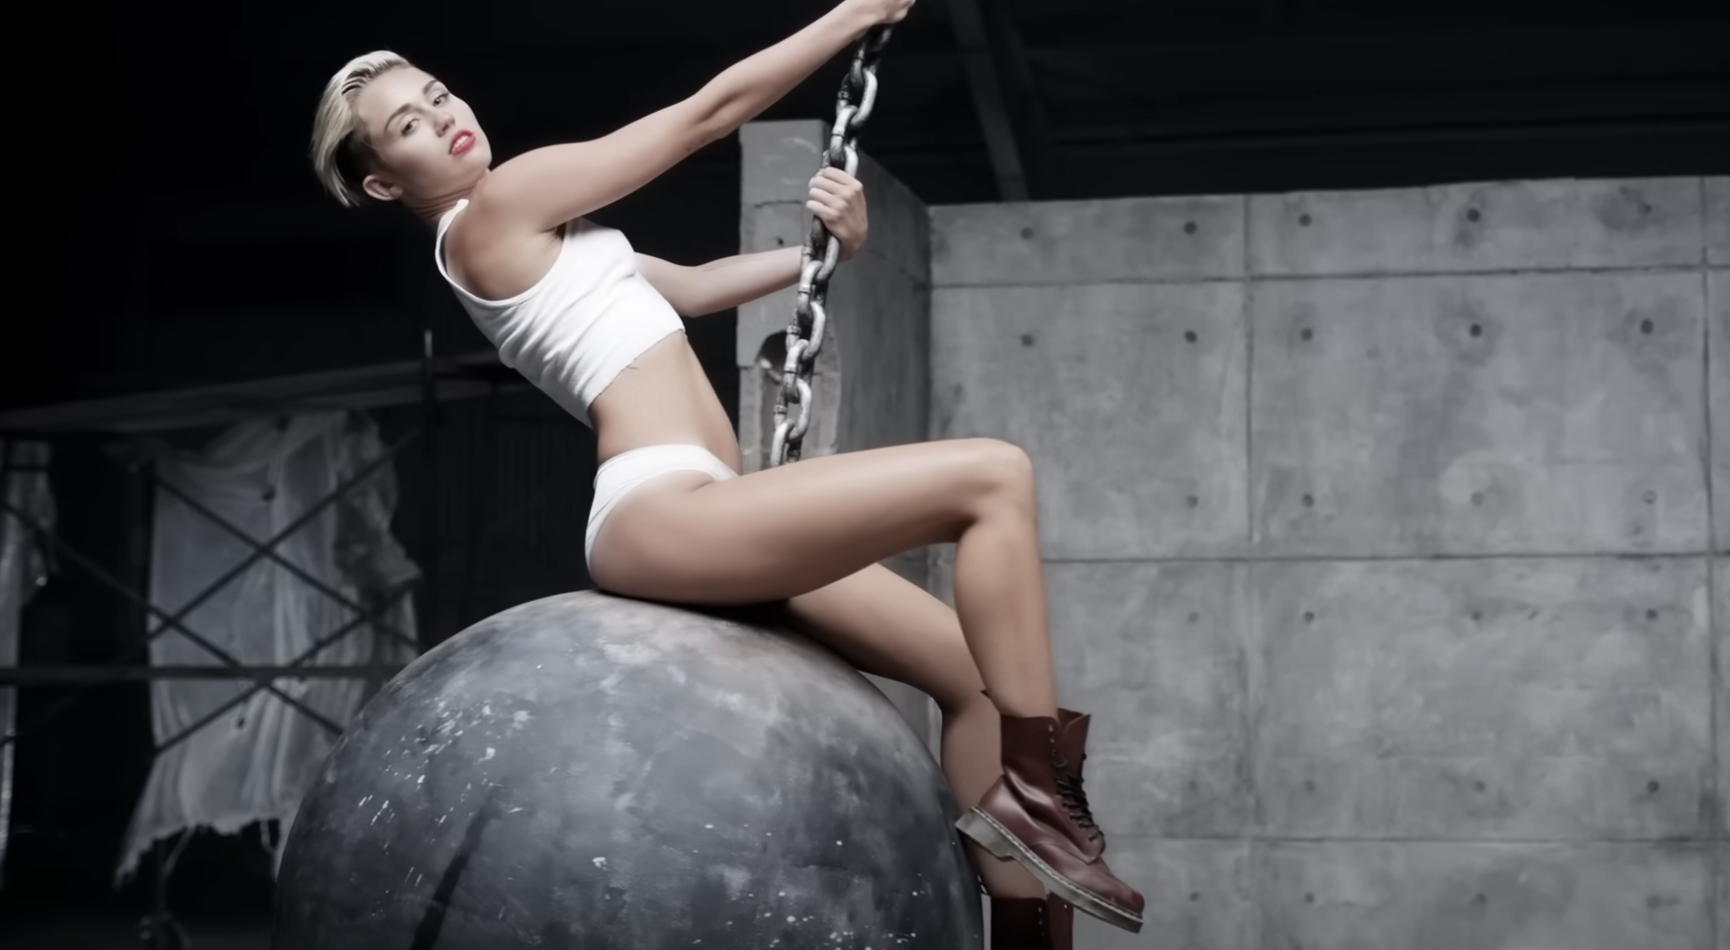 Miley swinging on a wrecking ball